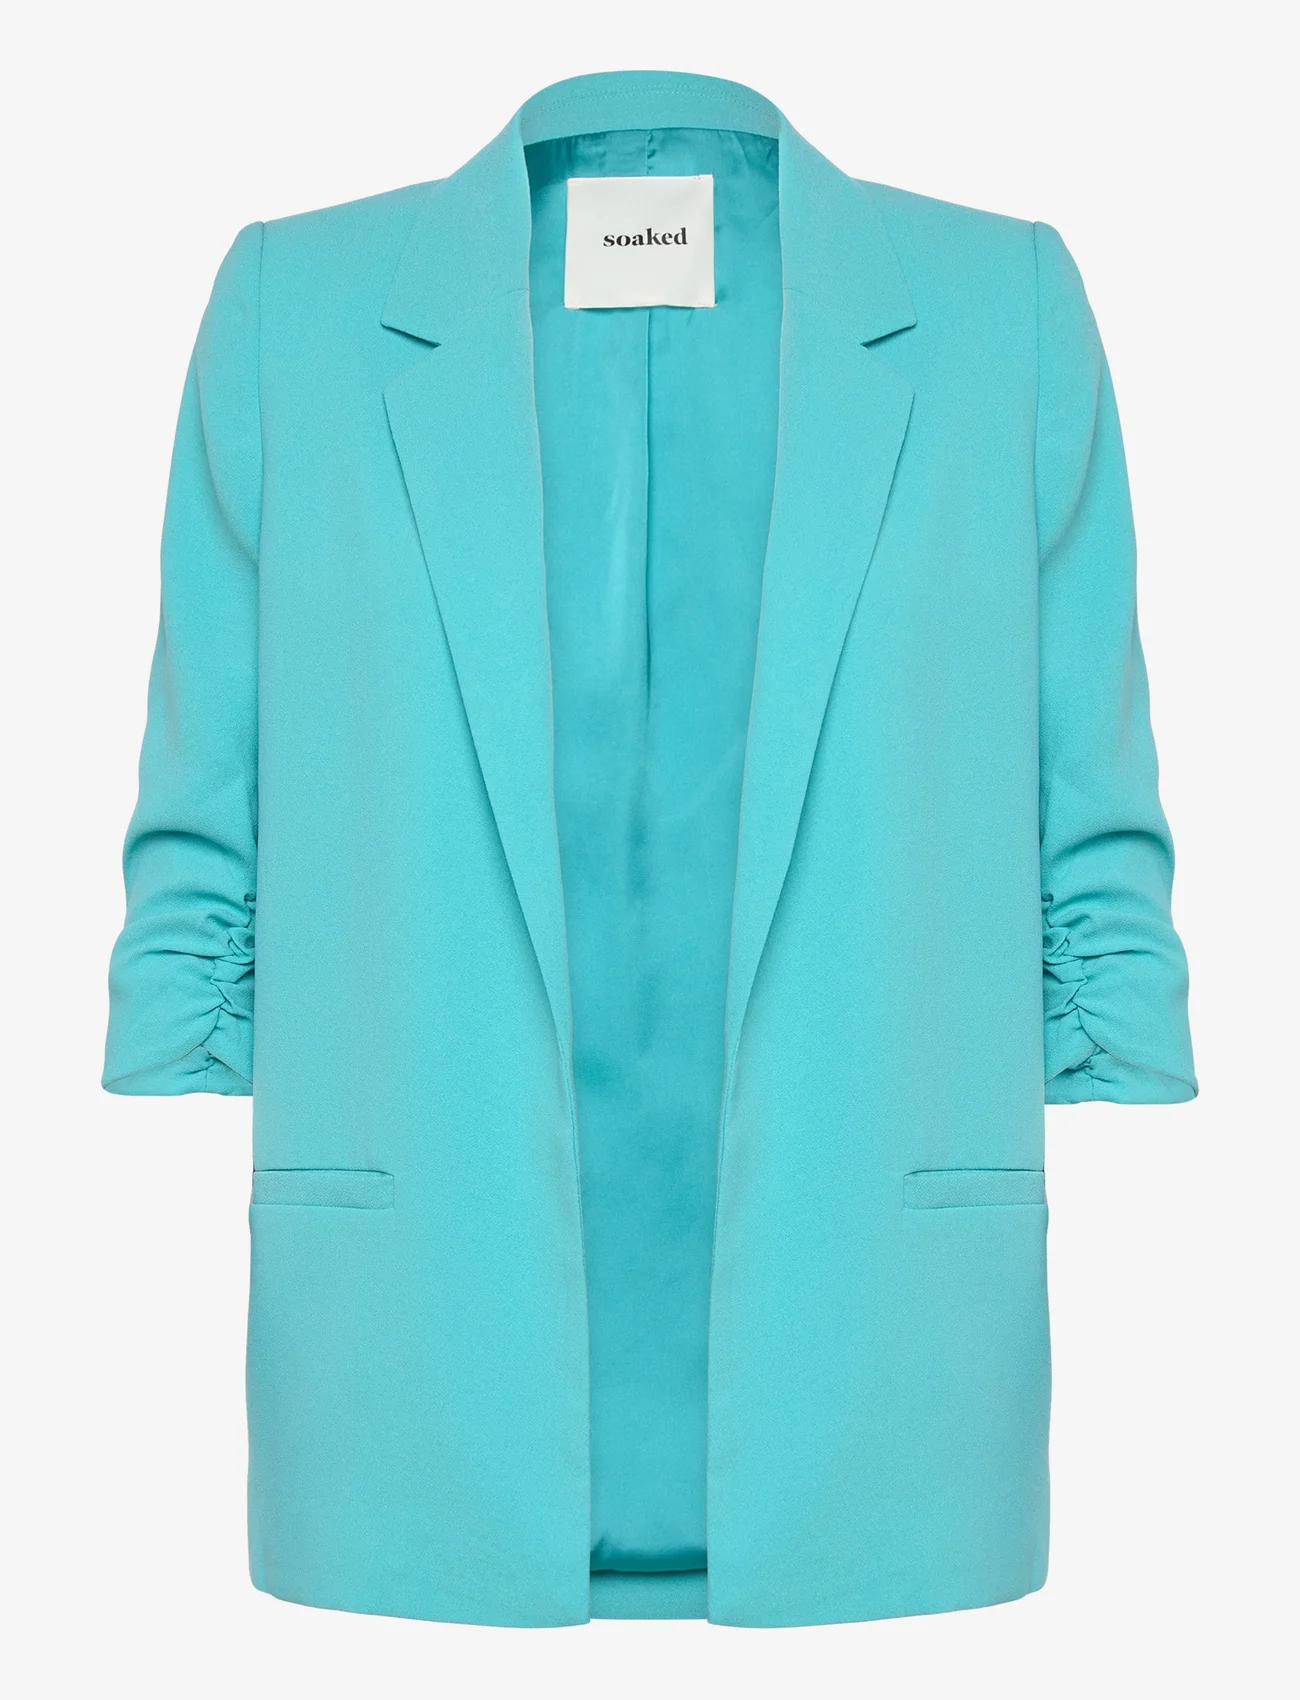 Soaked in Luxury - SLShirley Blazer - party wear at outlet prices - sea jet - 0